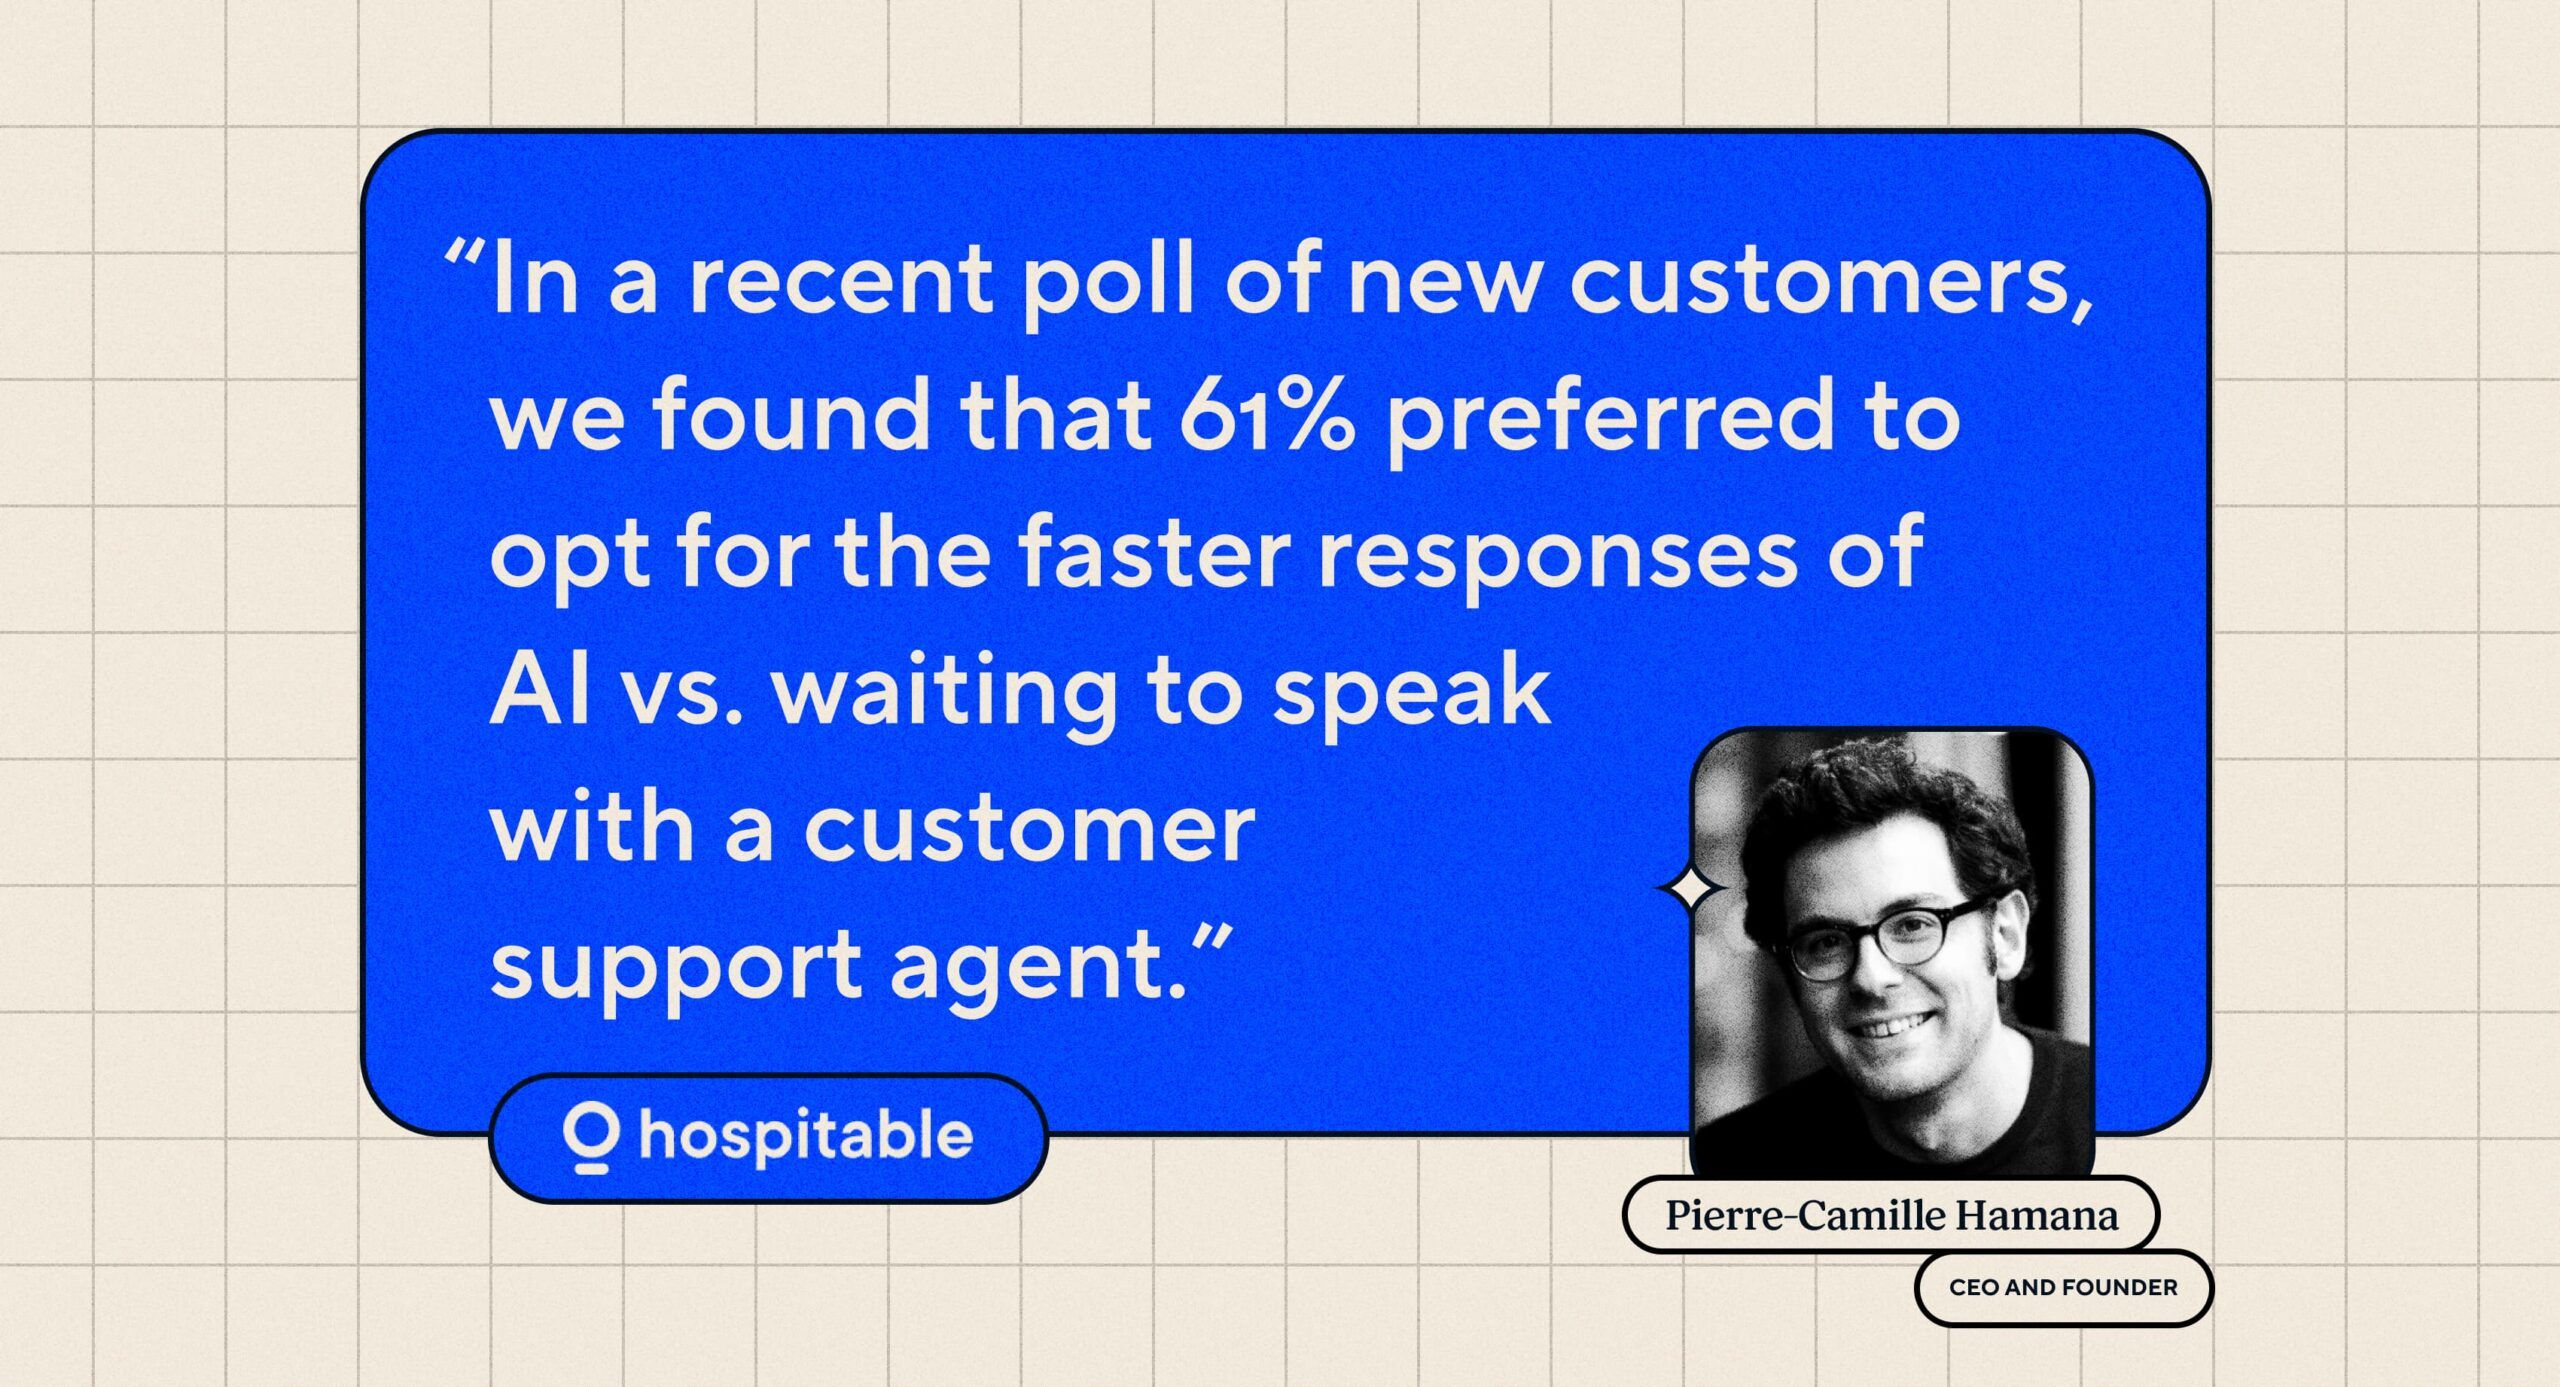 Quote: "In a recent poll of new customers, we found that 61% preferred to opt for the faster responses of AI vs waiting to speak with a customer support agent.” Pierre-Camille Hamana, CEO and Founder of Hospitable.